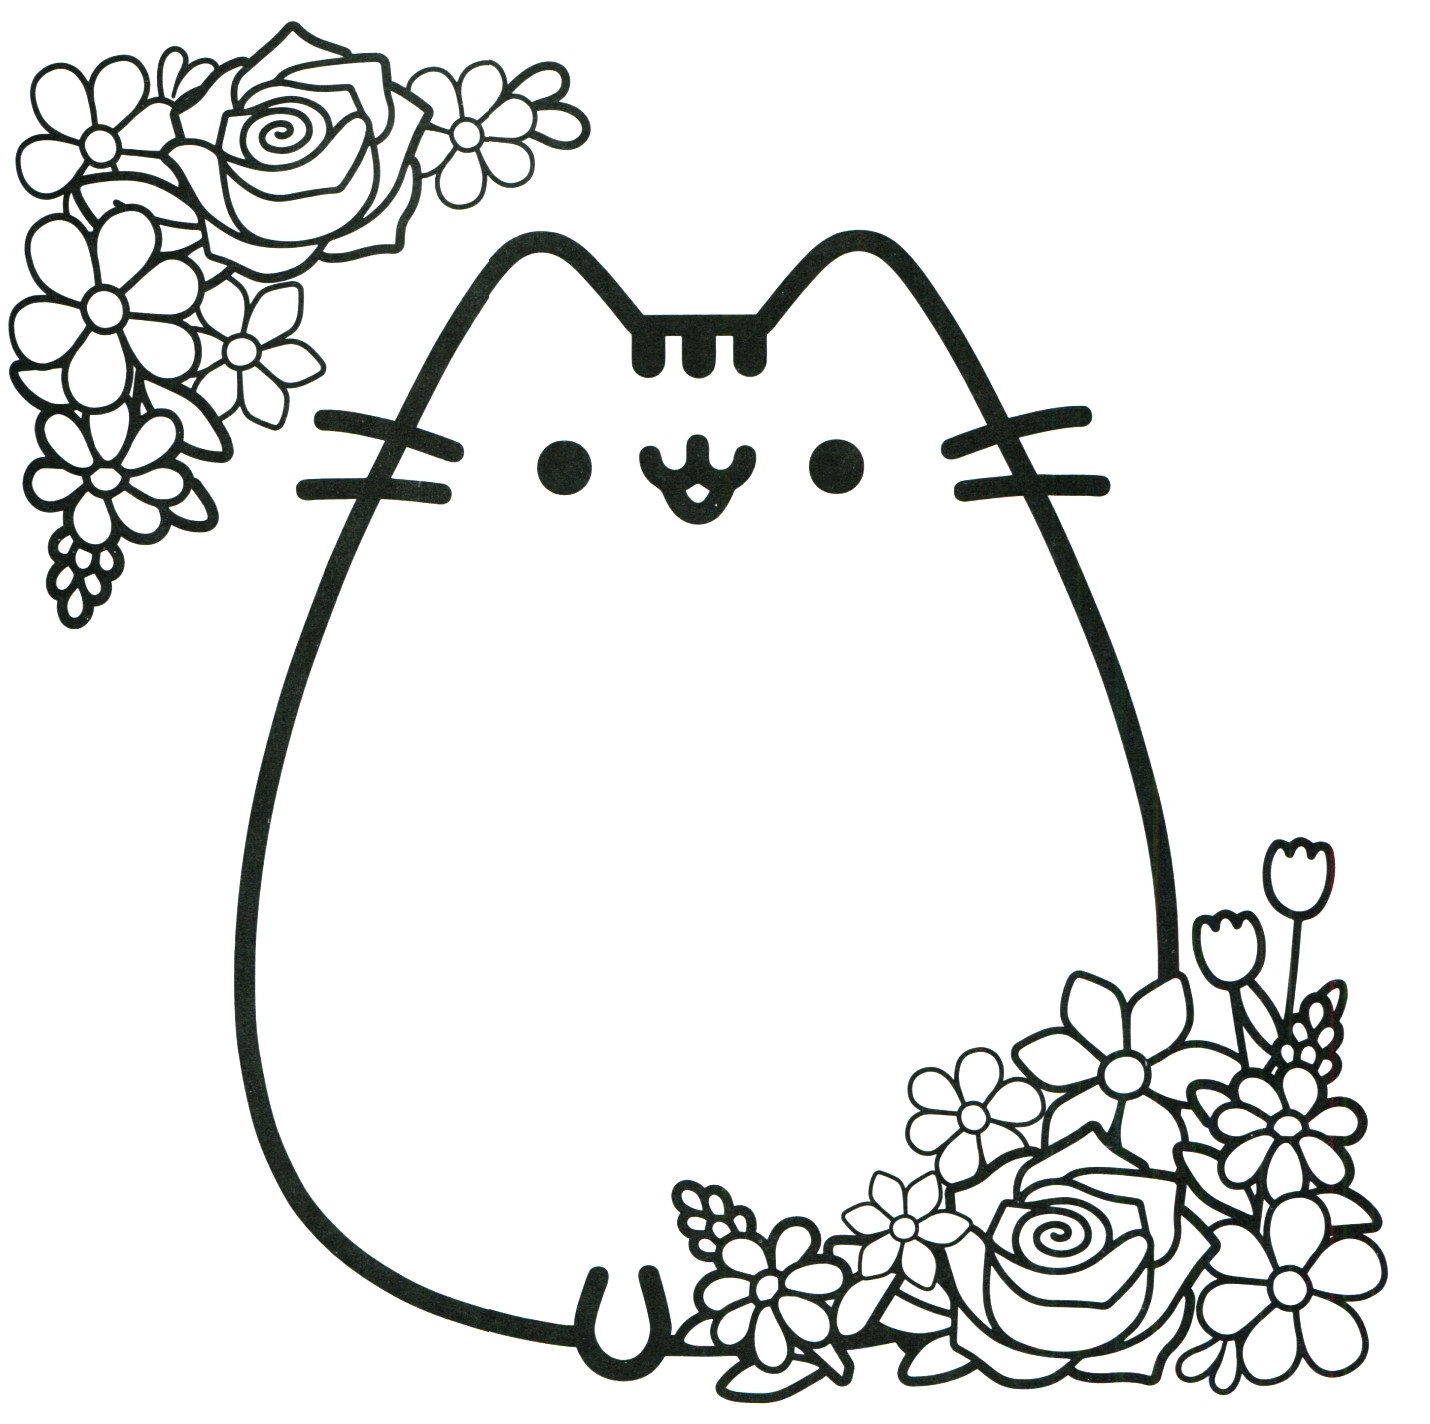 Rilakkuma Coloring Pages
 Rilakkuma Coloring Pages Download Free Coloring Books